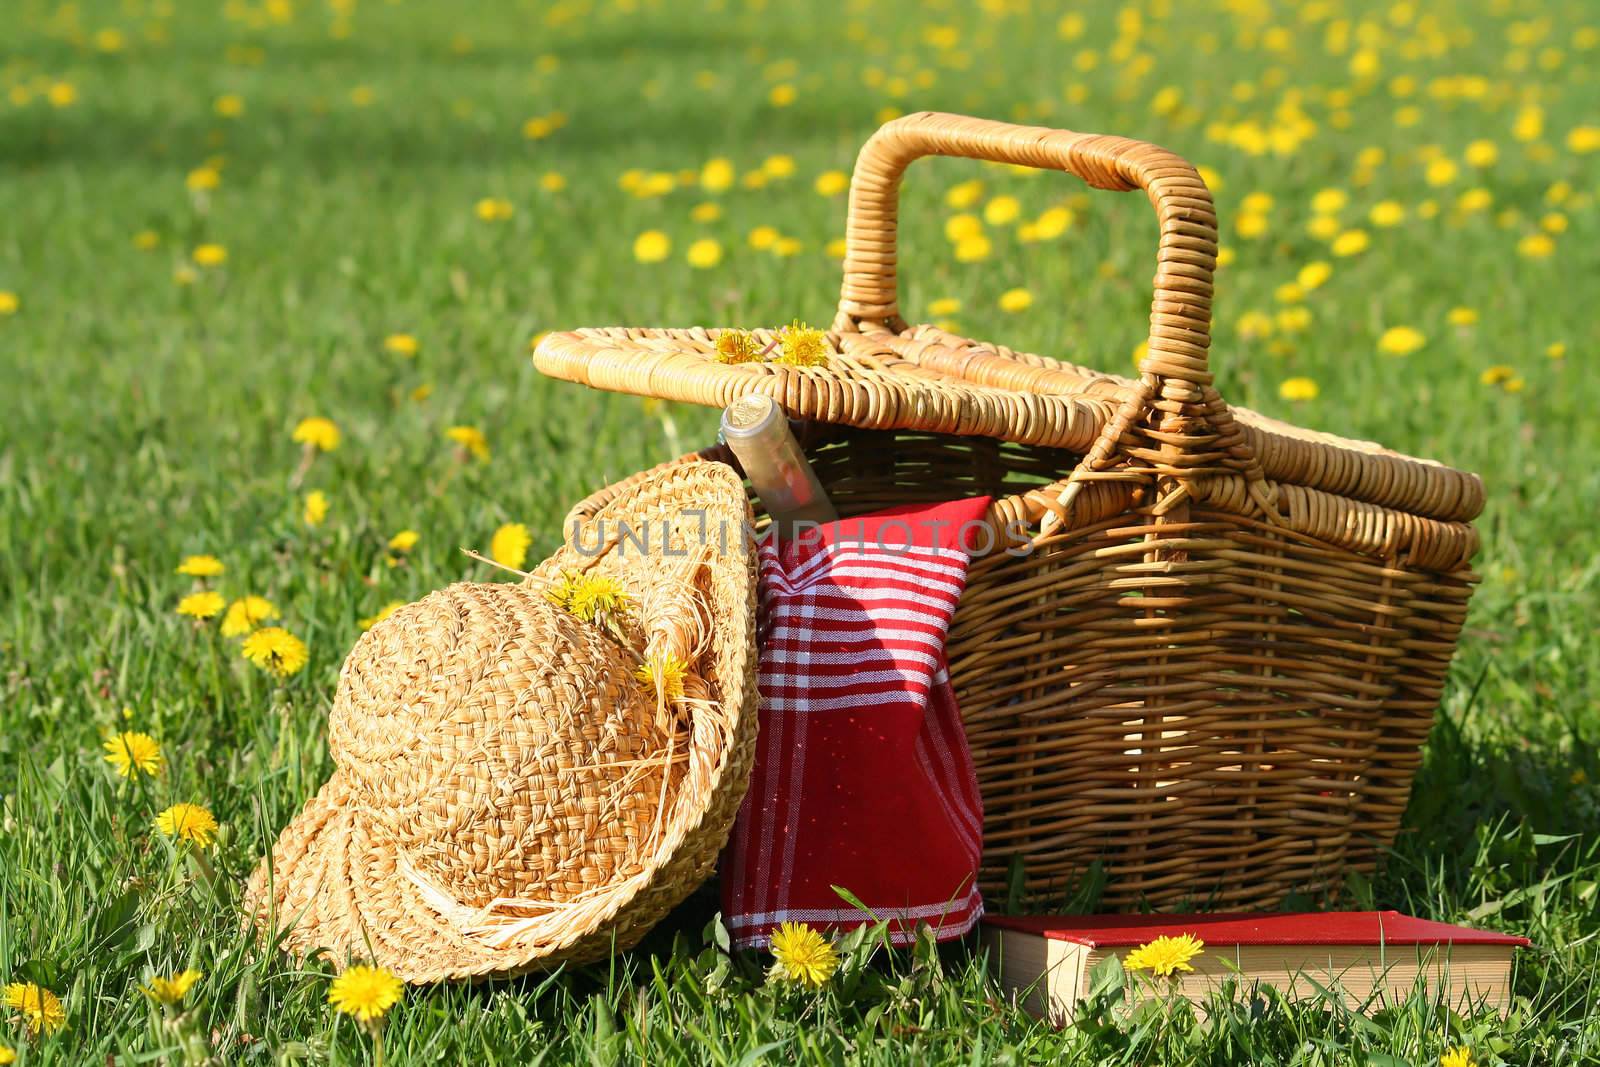 Picnic basket and straw hat laying on the grass